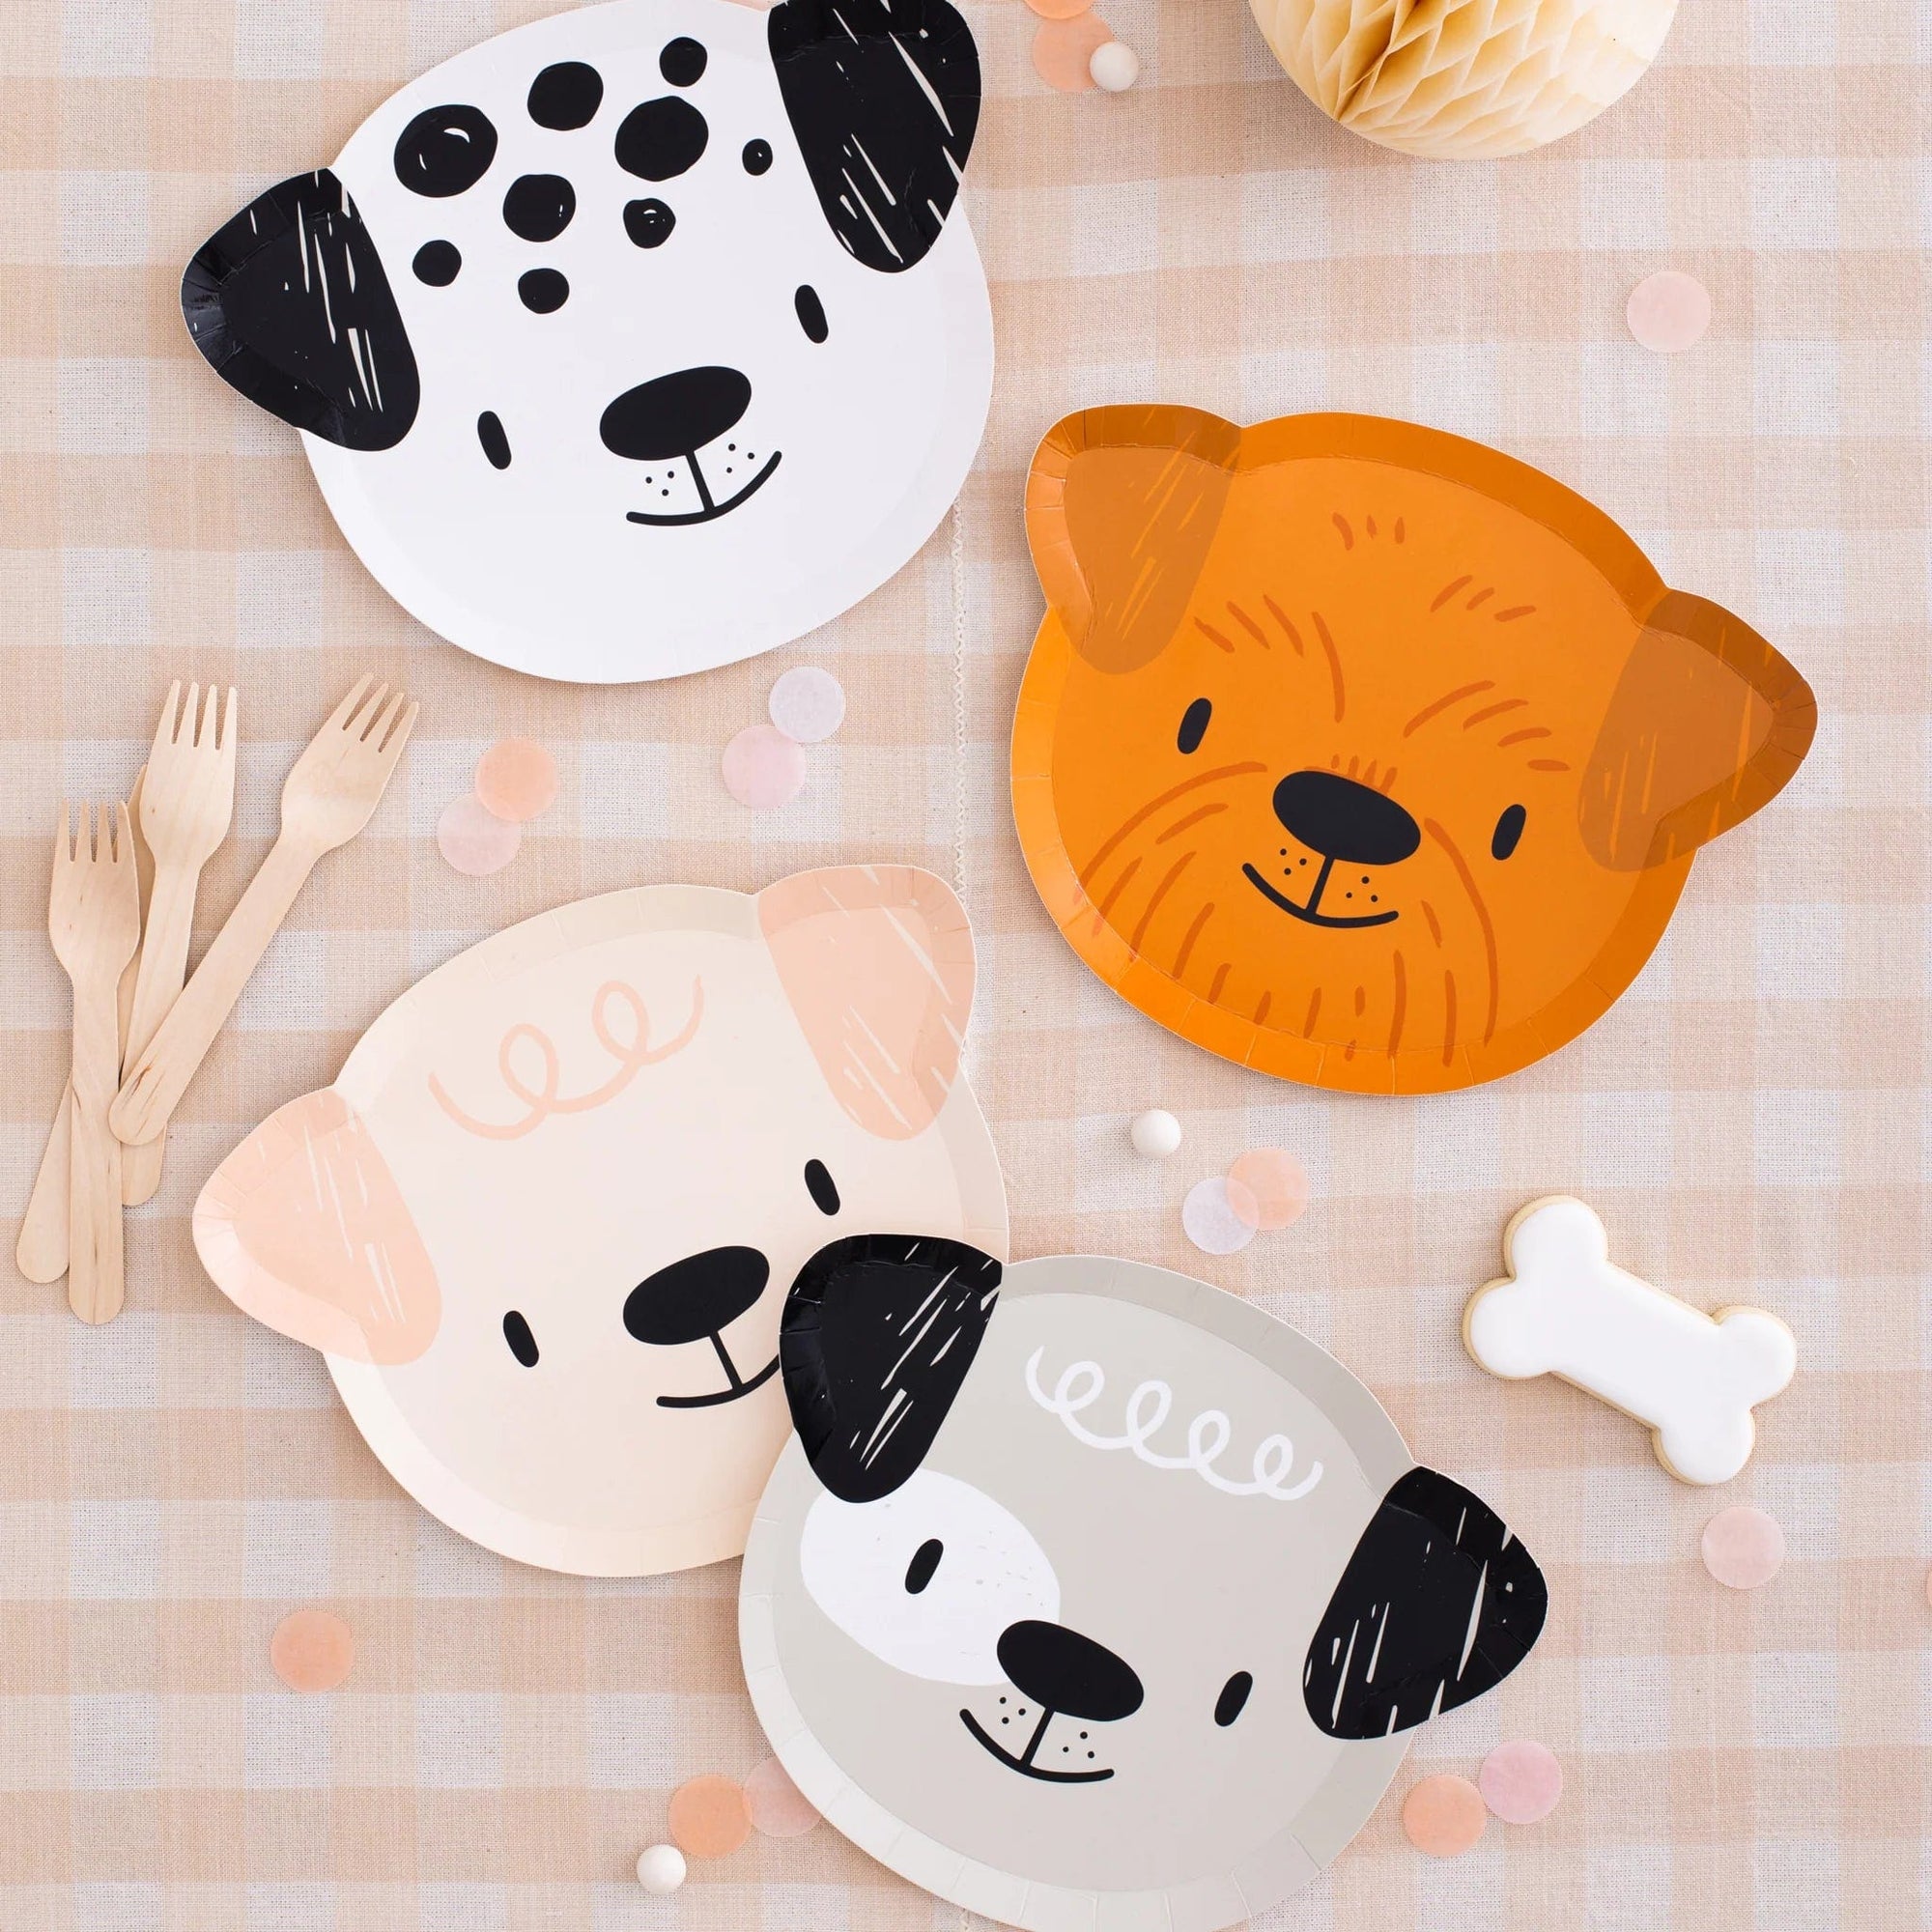 Bow Wow Puppy Plates